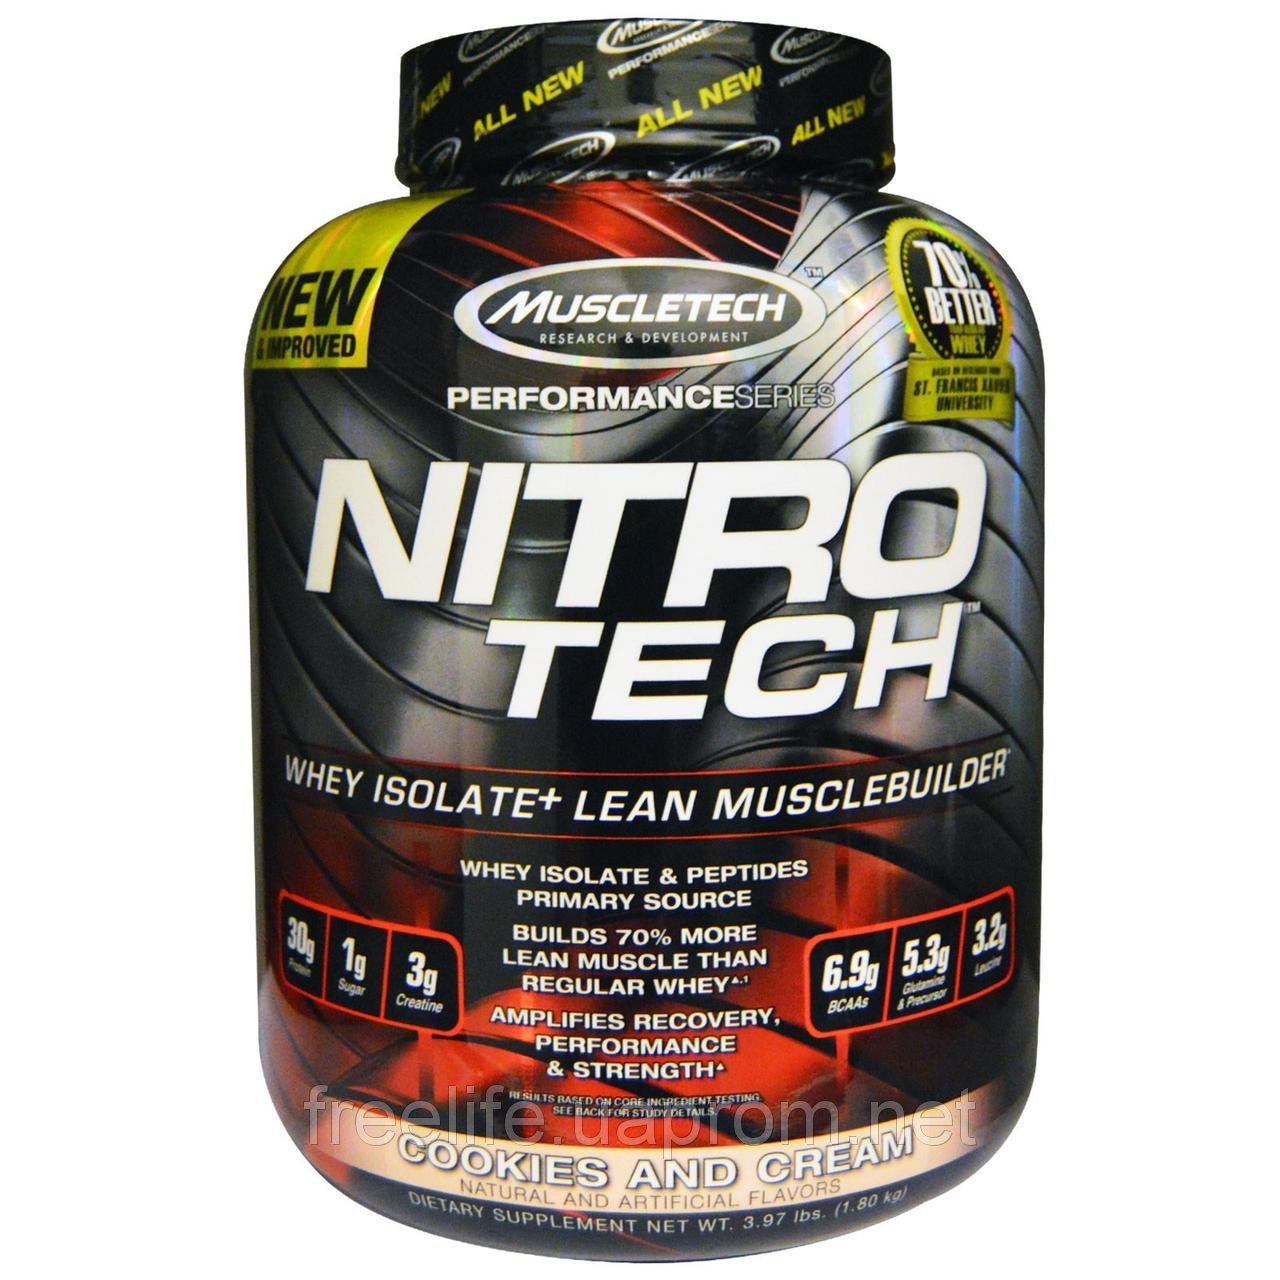 NitroTech, 1818 g, MuscleTech. Whey Protein. recovery Anti-catabolic properties Lean muscle mass 